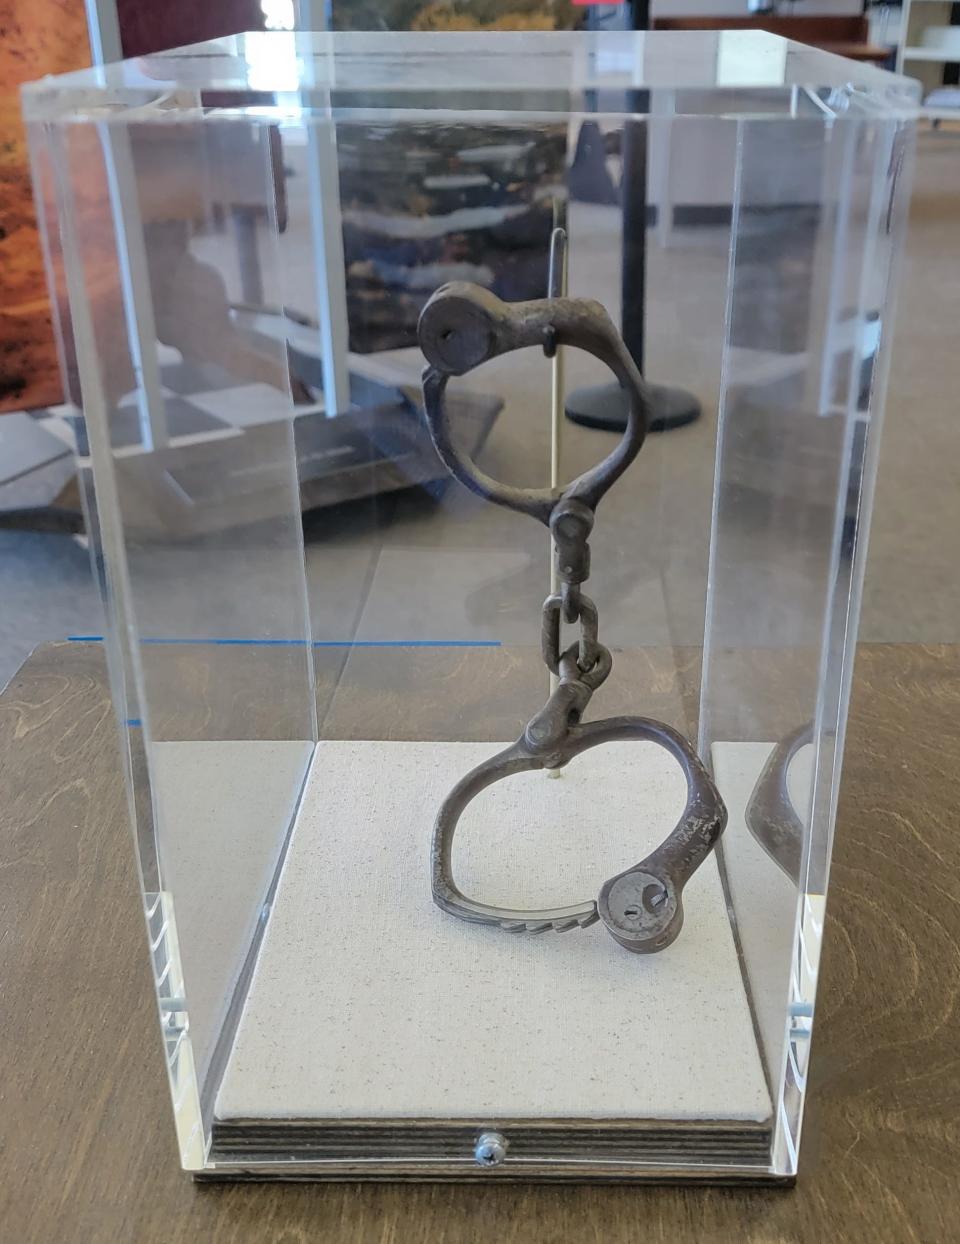 Children's manacles on display at Manitowoc Public Library as part of the National Endowment for the Humanities On the Road Exhibition on American Indian boarding schools. The exhibit runs through Aug. 11.